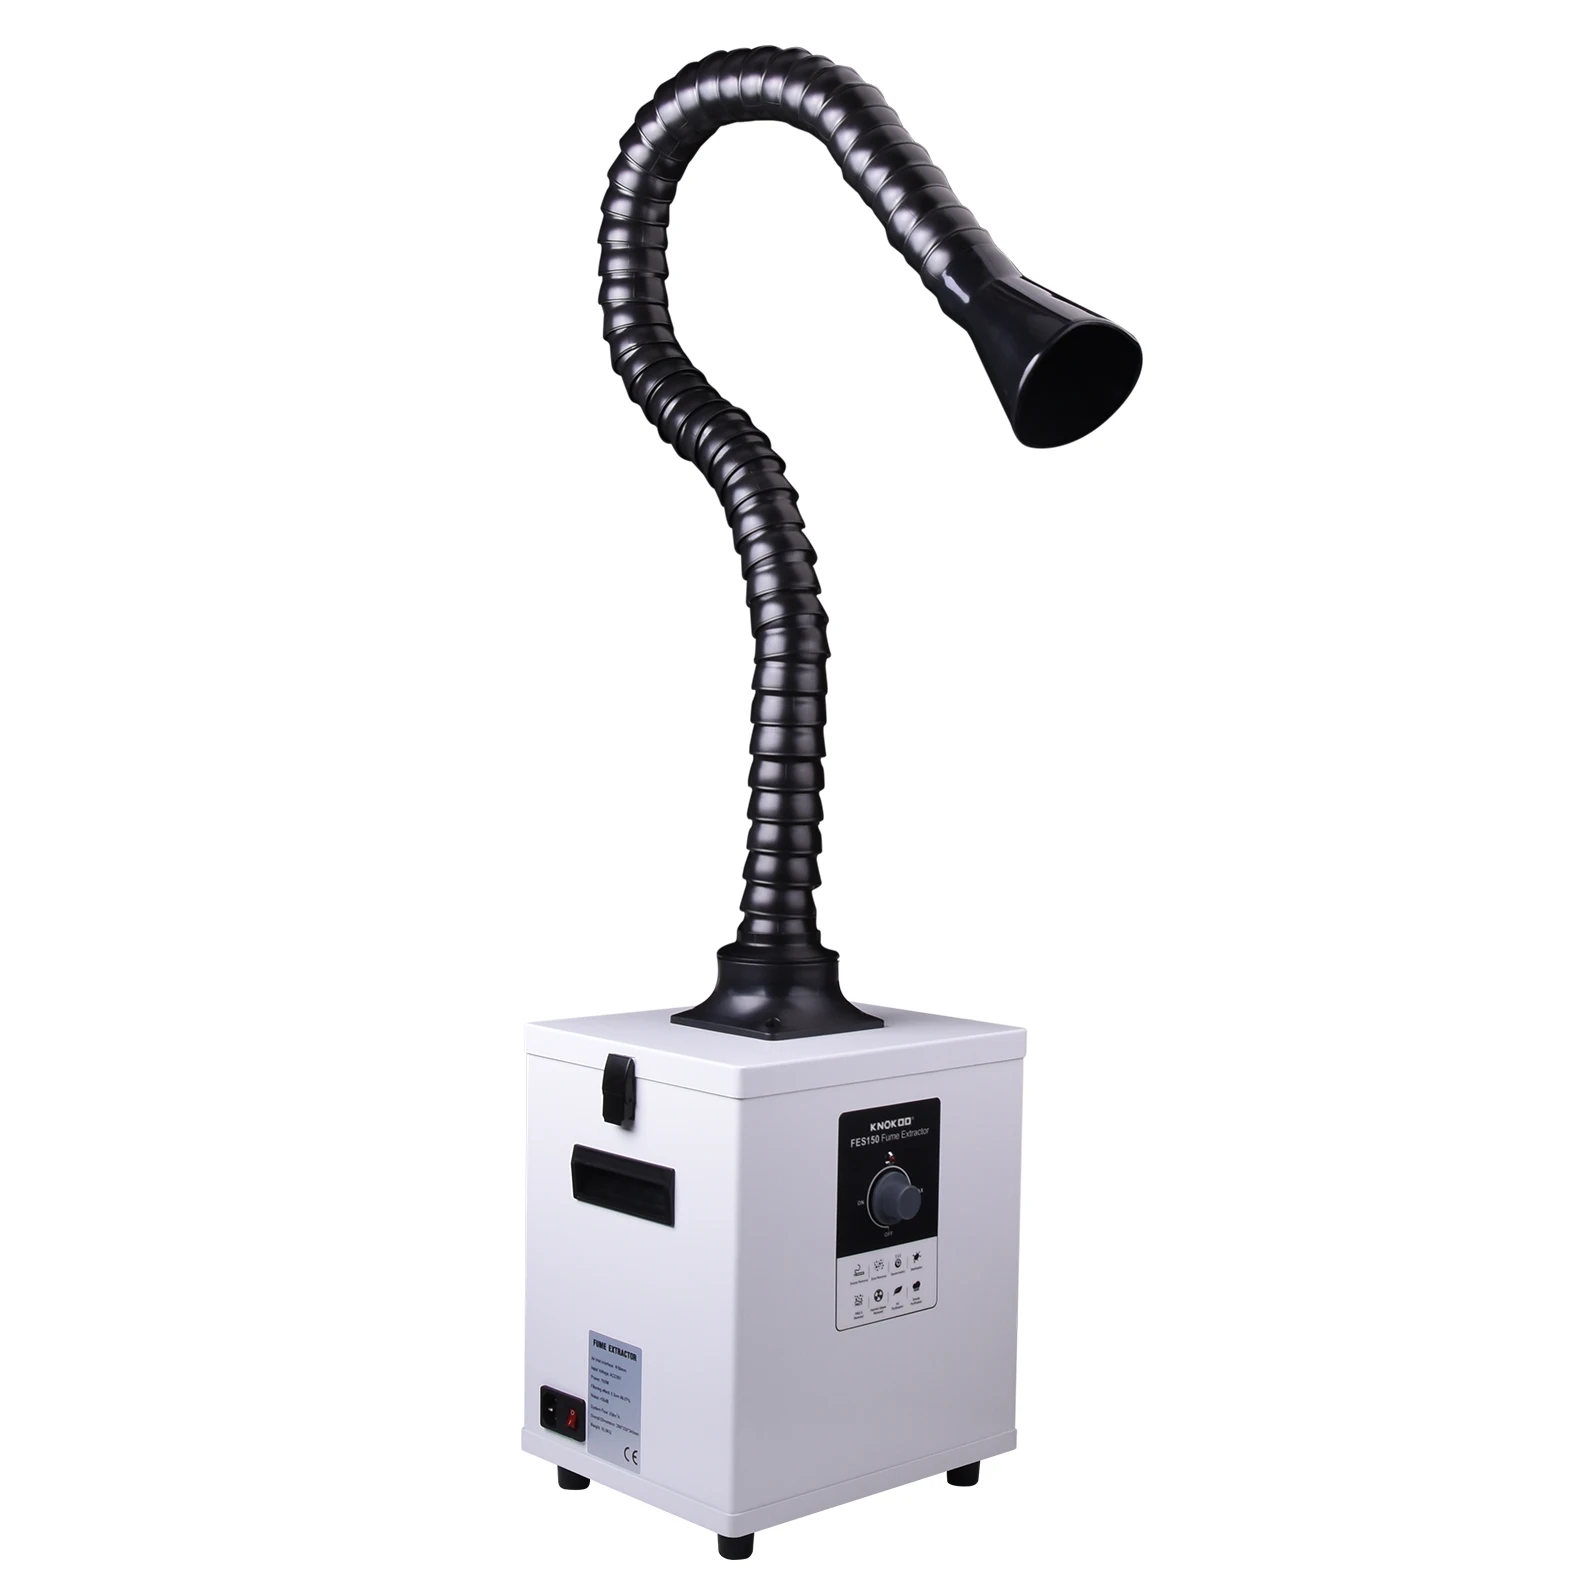 150W Fume Extractor Laser Smoke Absorber Machine Dust Collector for Nail Salon and Soldering 3 Stage Filter